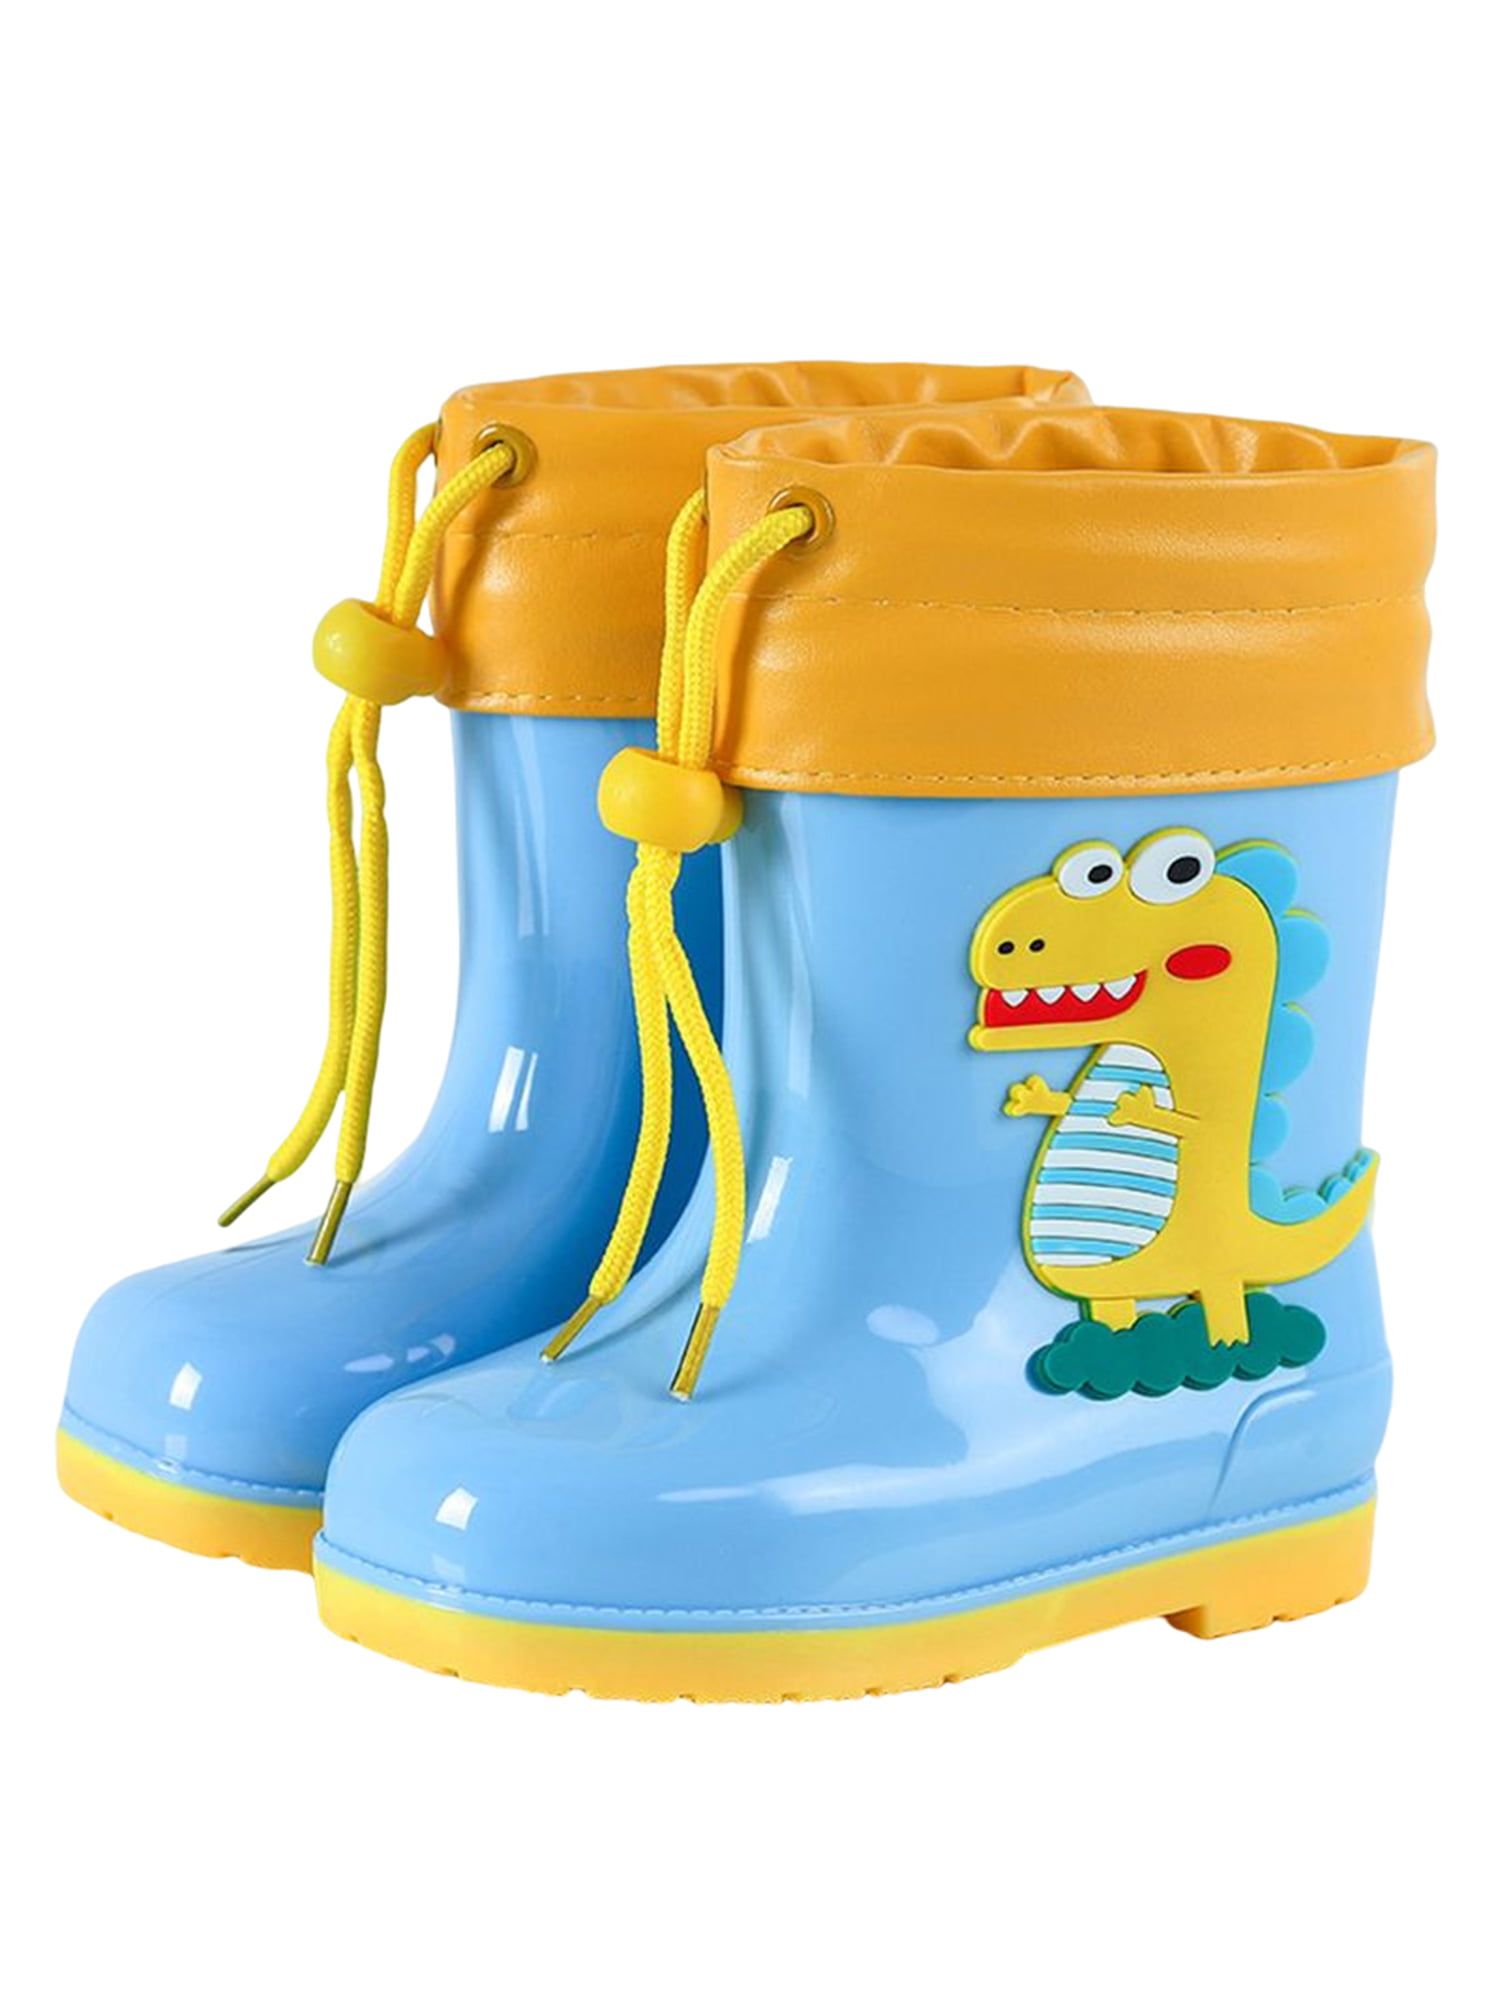 Playshoes flexible rain booties blue for toddlers